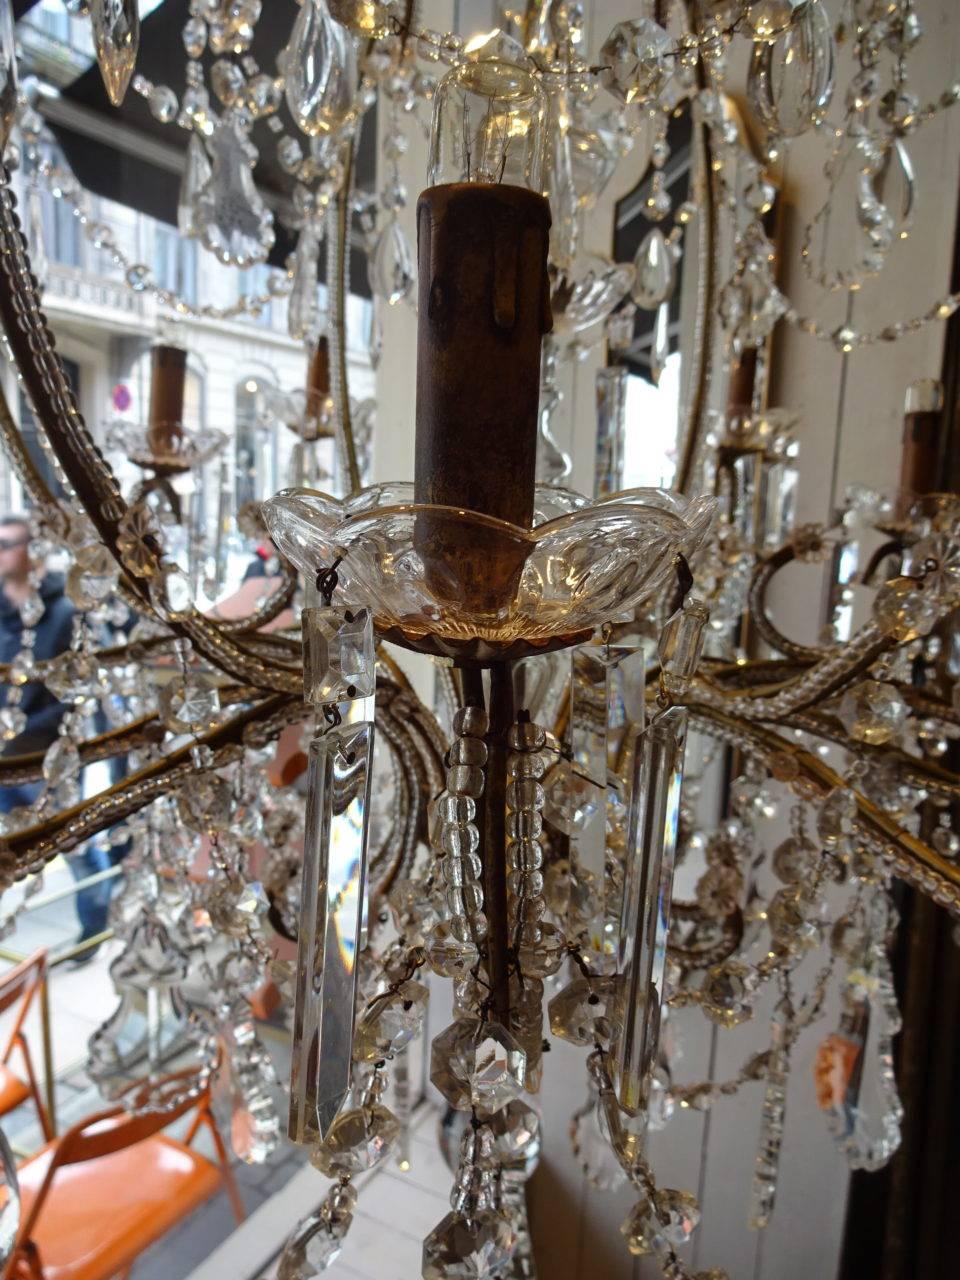 Glorious and large vintage French chandelier, circa 1920s, with a gilt frame and dozens of glass prisms leaves and beading work. 24-light sources in two levels. Wonderful piece and a work of art in its own right.

Measures: Height 145 x diameter